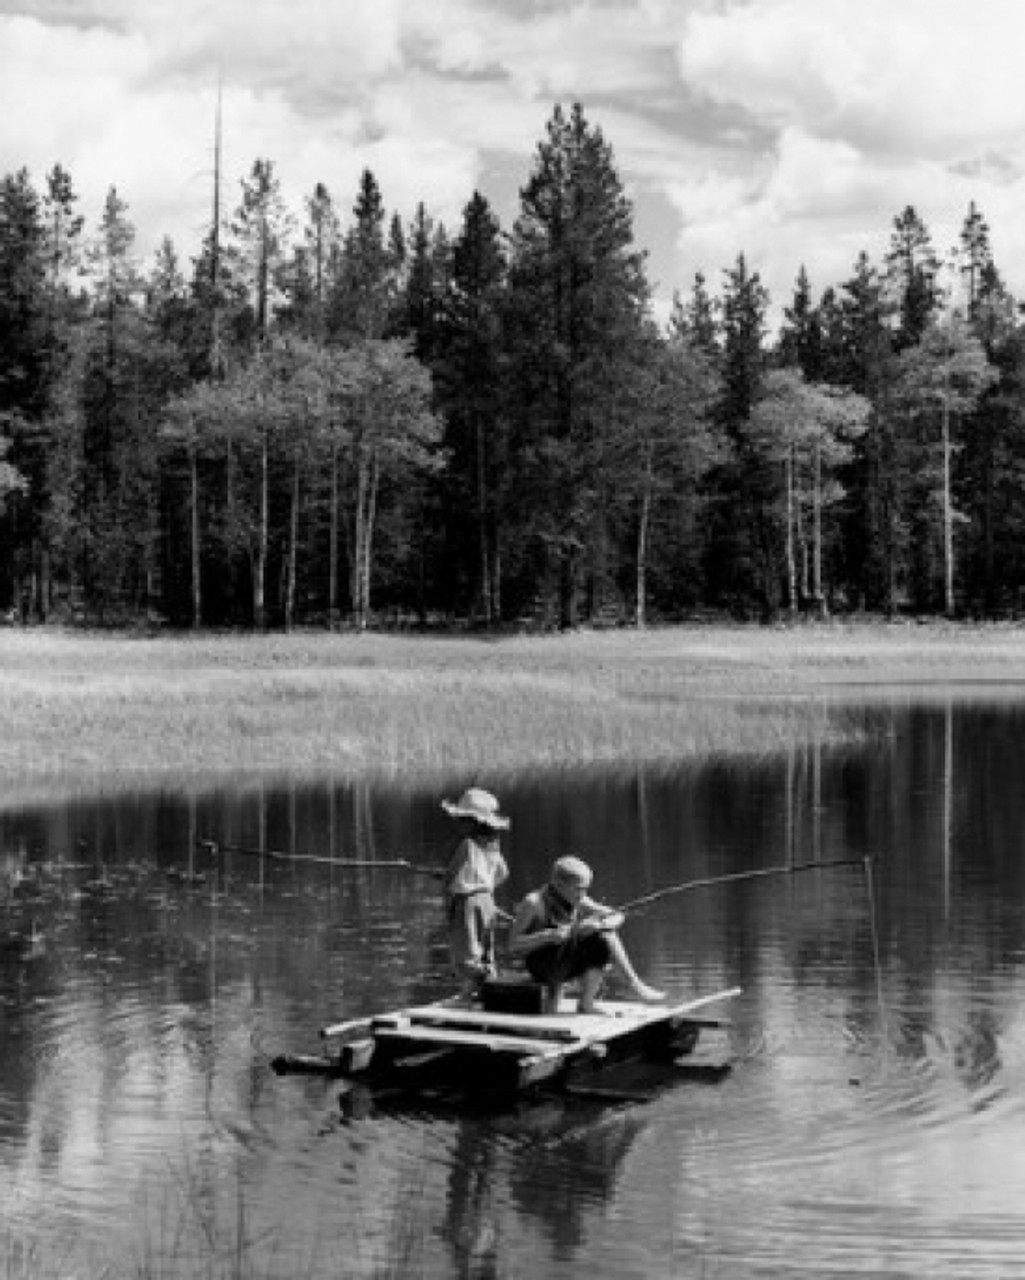 Vintage photograph of boy and girl sitting on wooden raft fly-fishing with  improvised fishing rods on lake Poster Print - Item # VARSAL25516349 -  Posterazzi